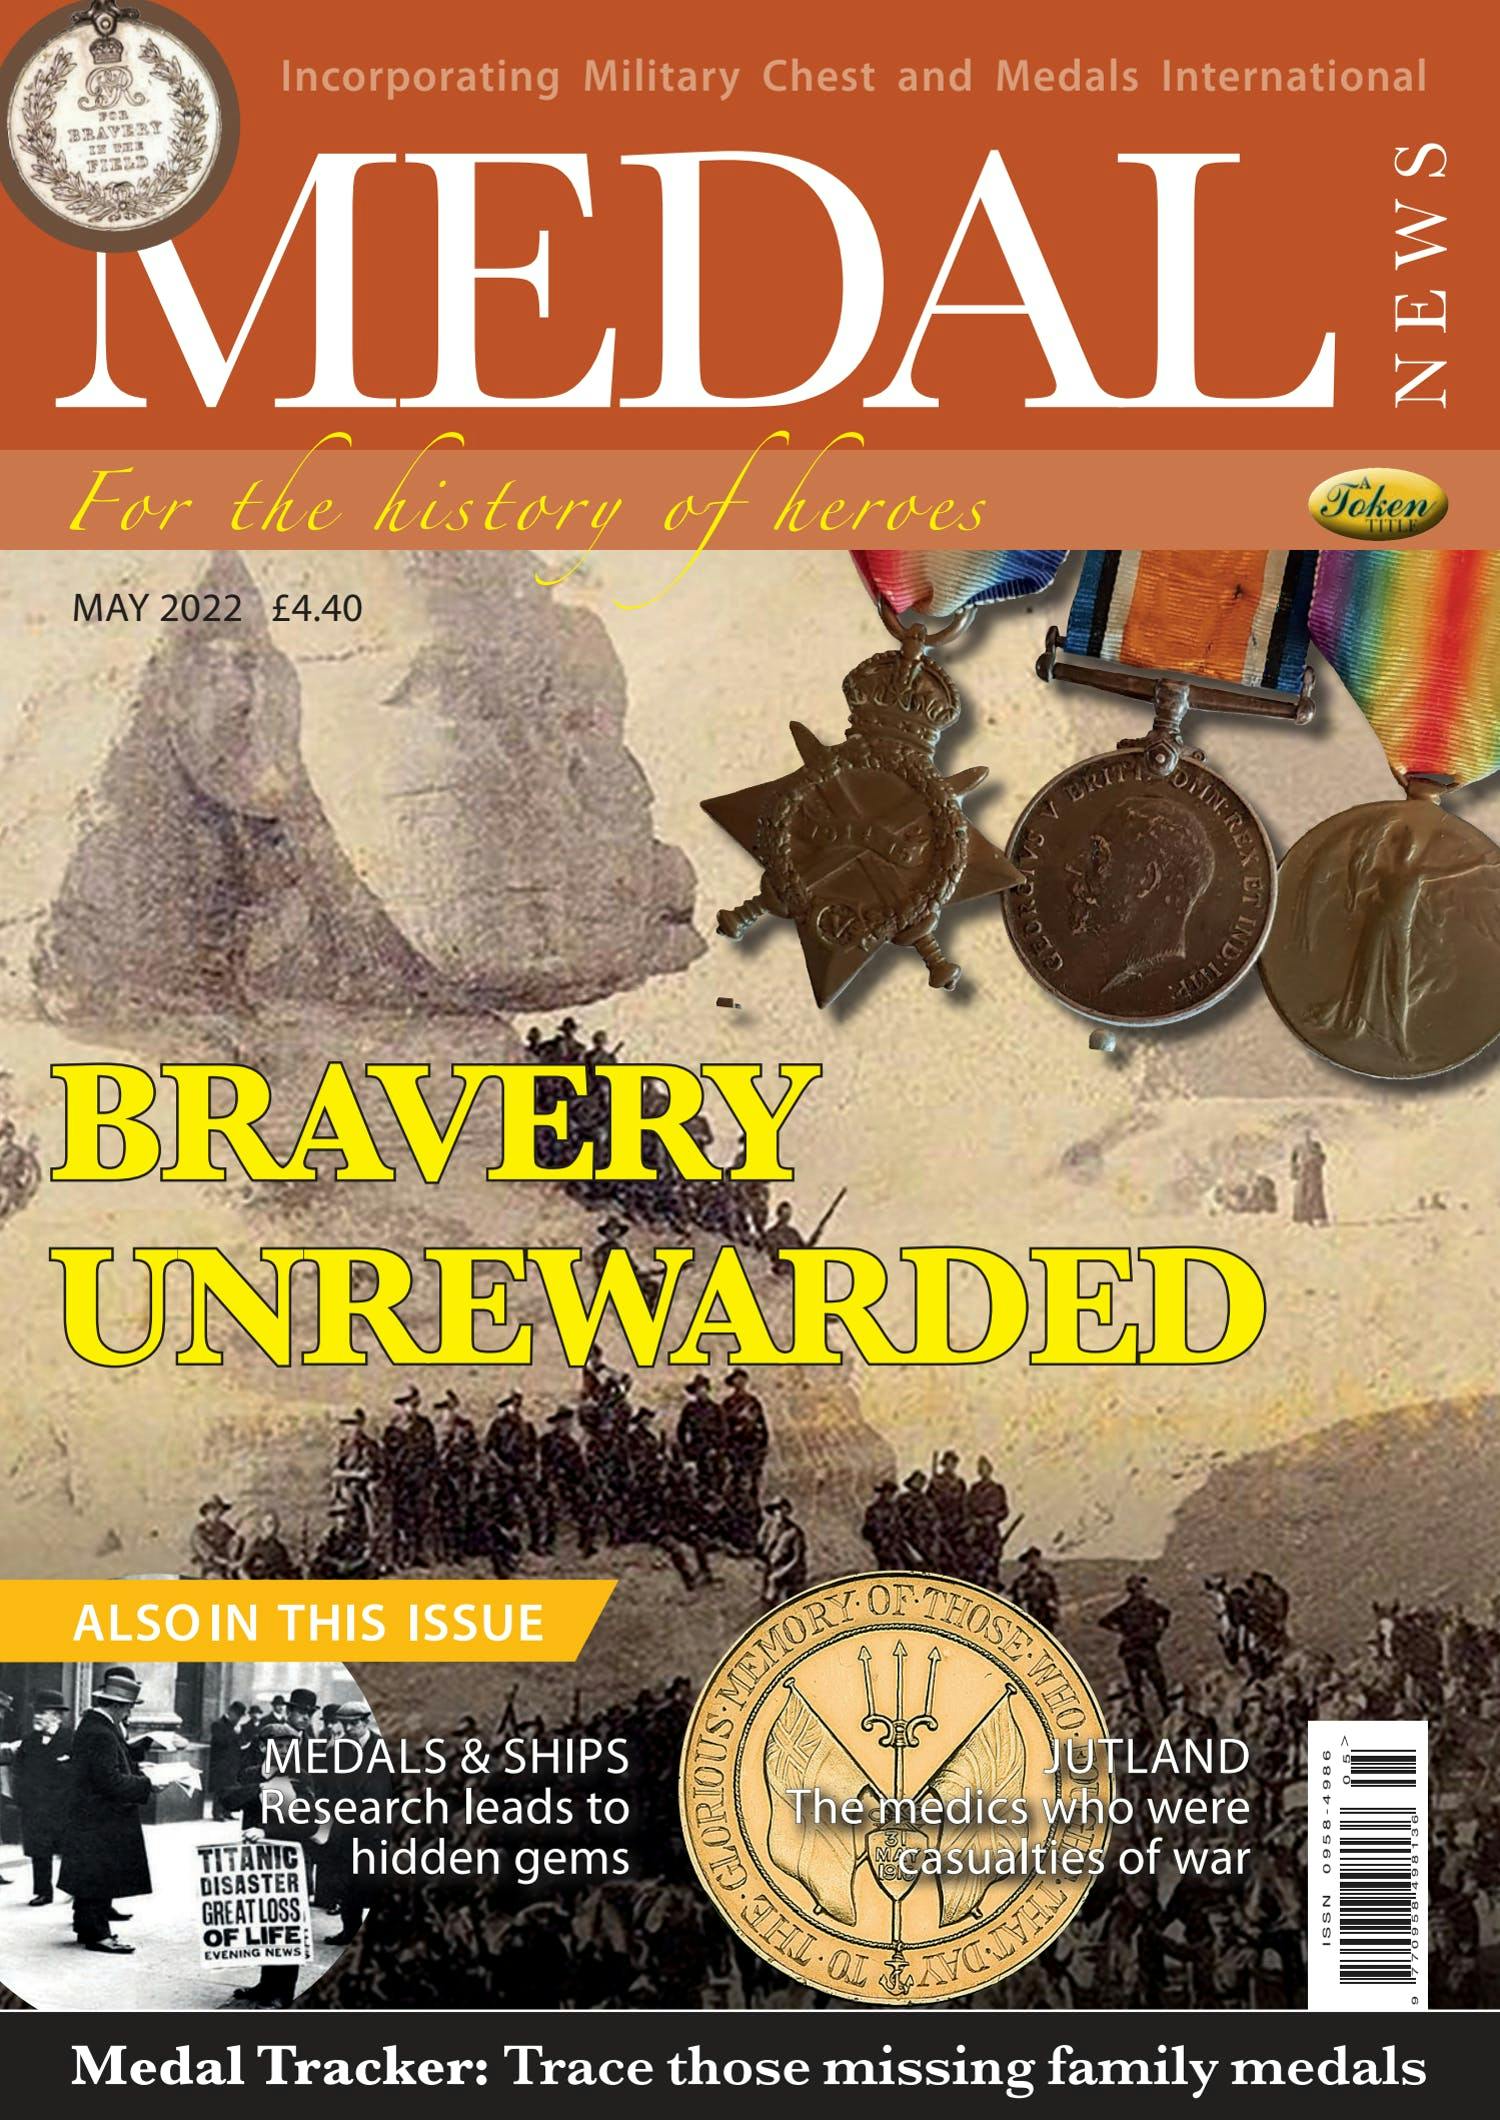 The front cover of Medal News, May 2022 - Volume 60, Number 5